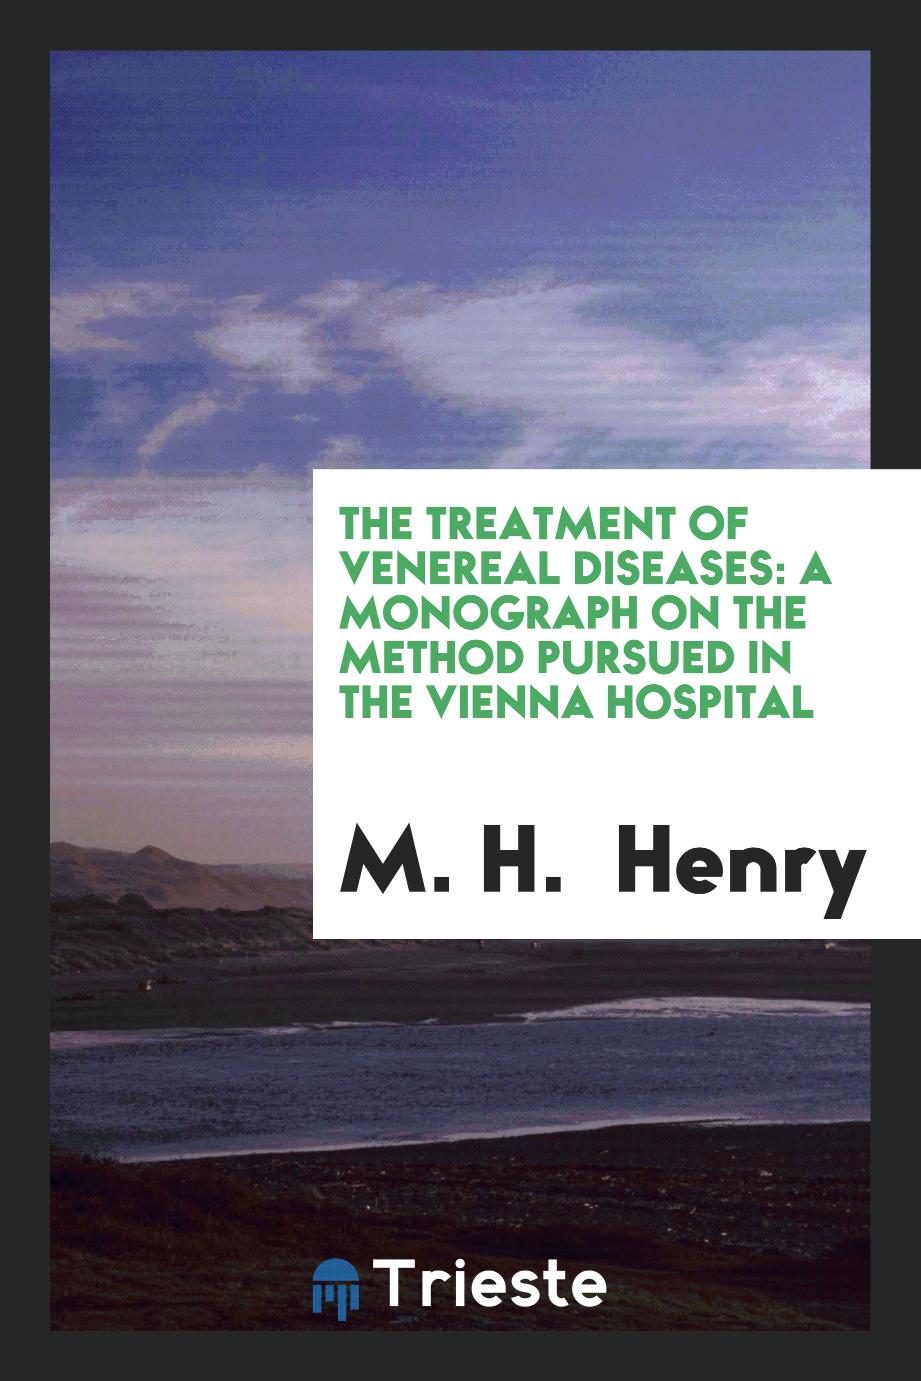 The Treatment of venereal diseases: A Monograph on the Method Pursued in the Vienna Hospital